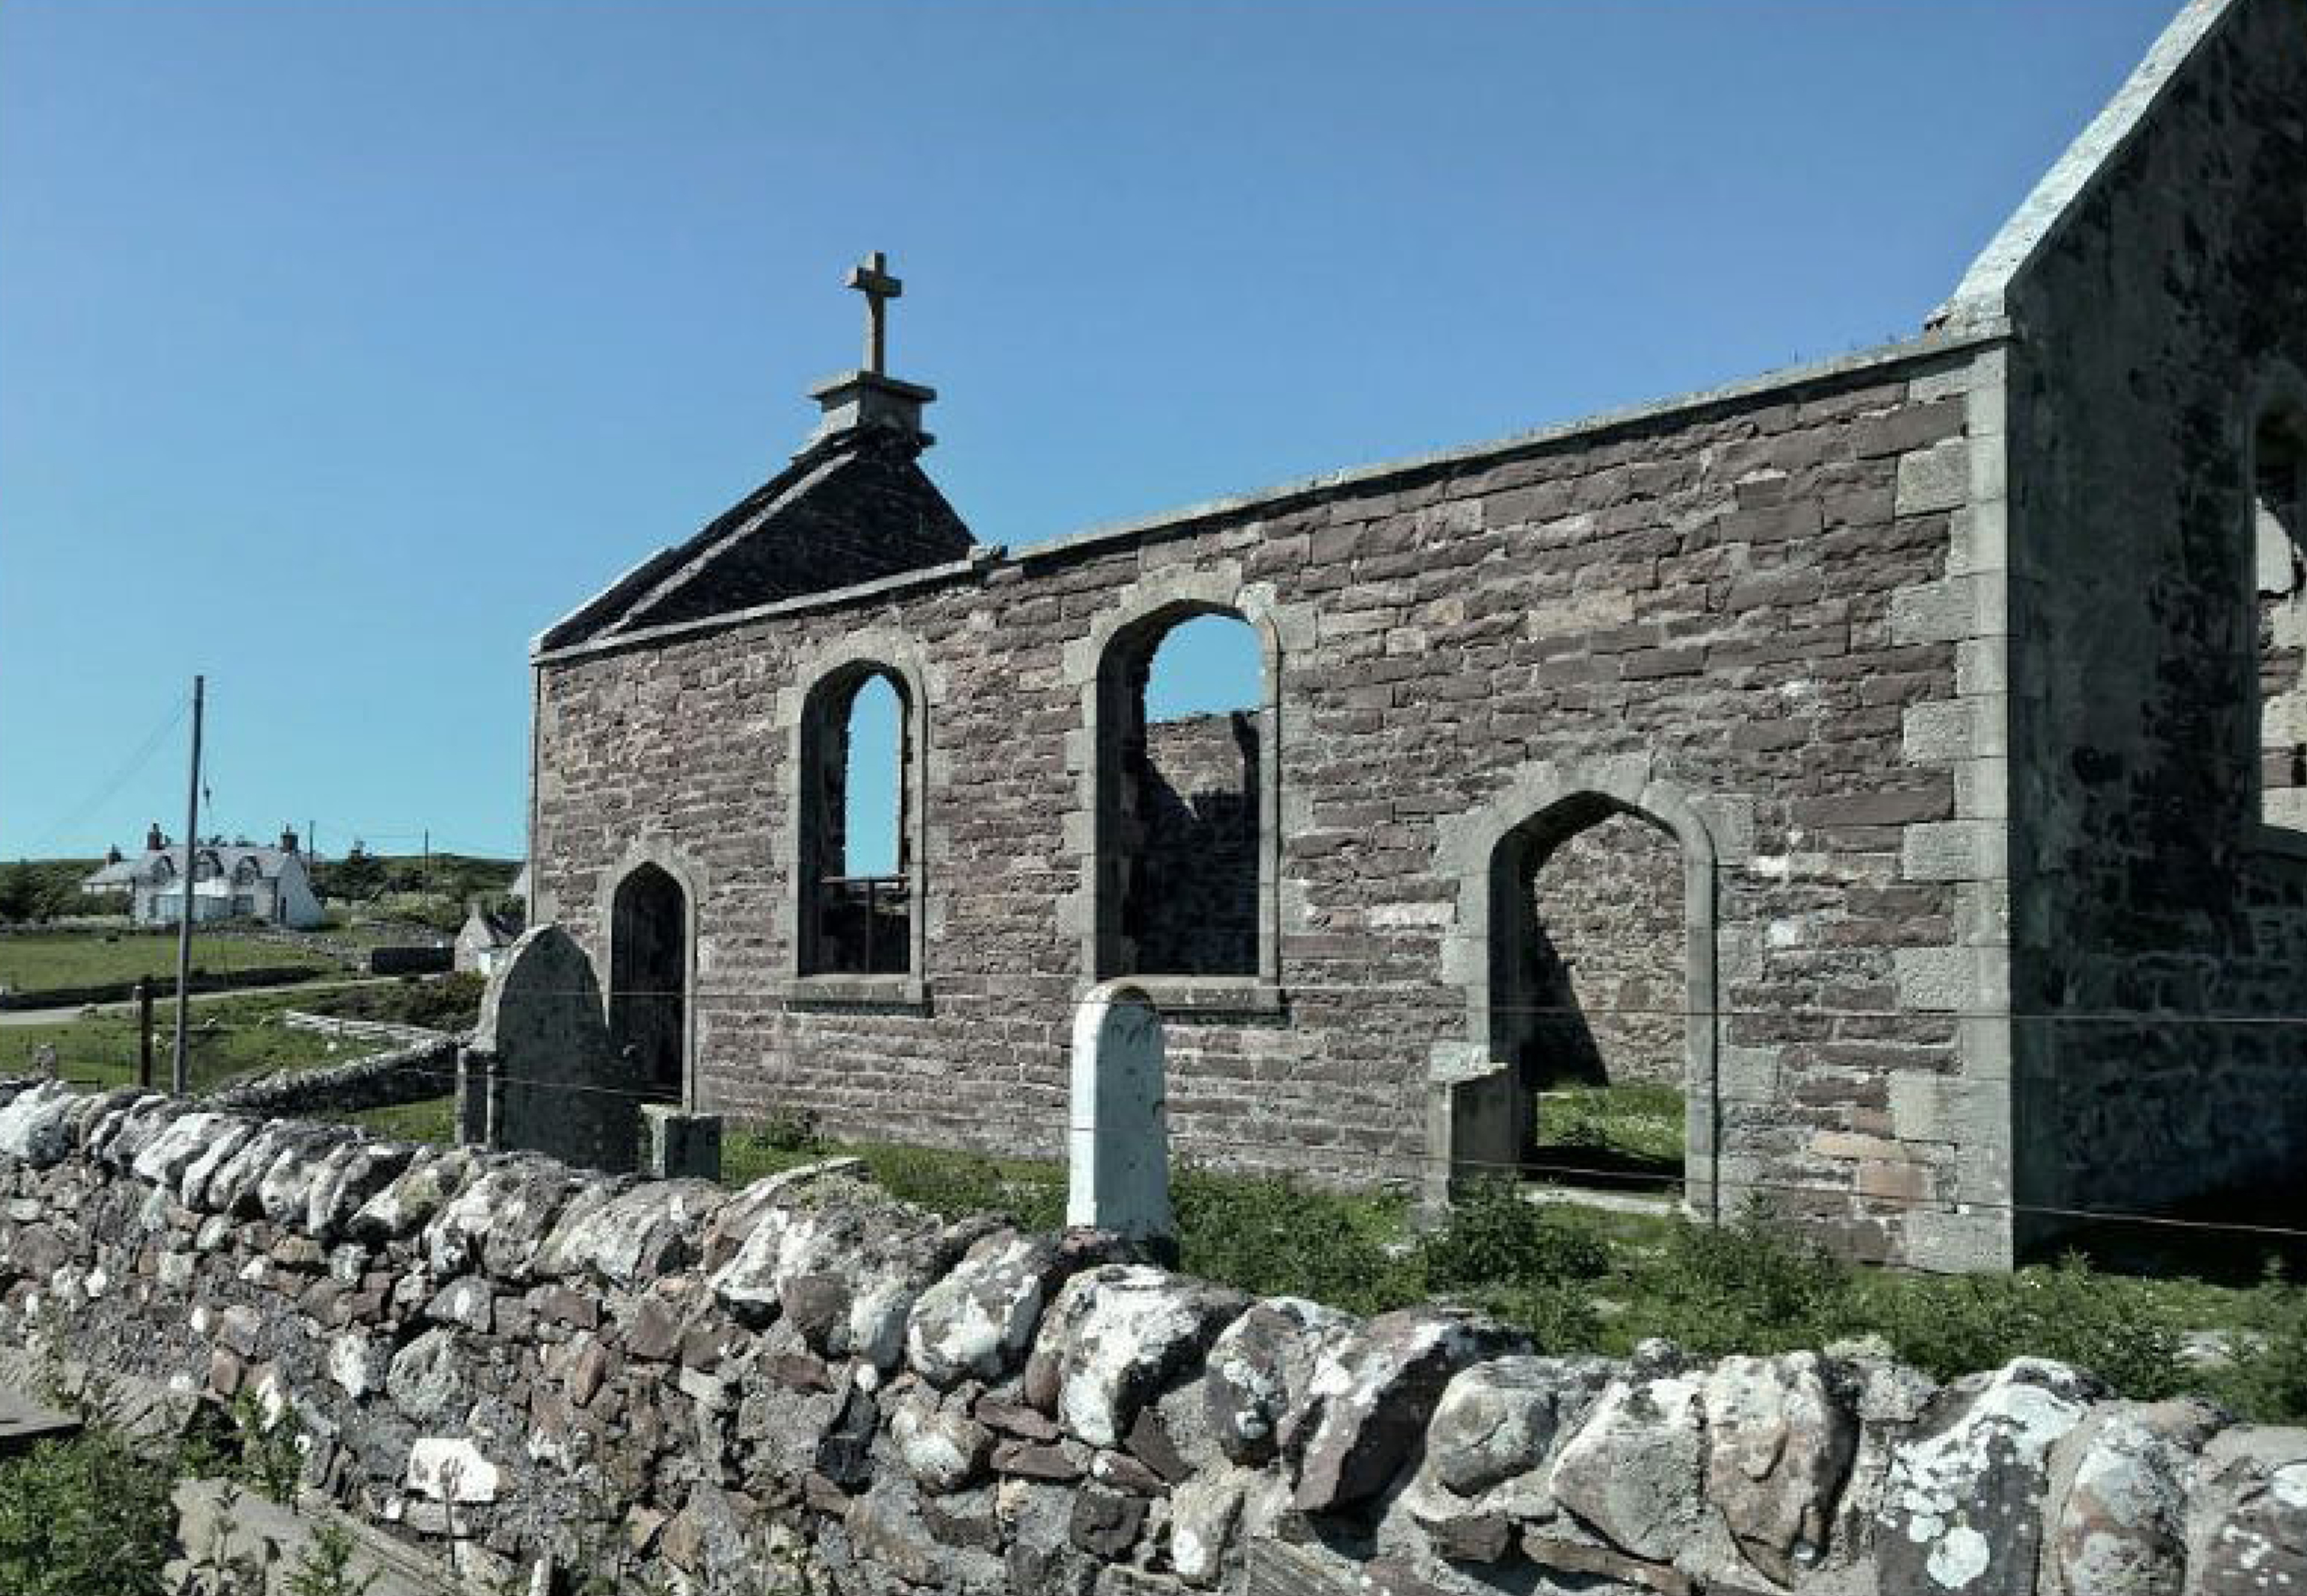 An appeal has been lodged against the decision to refuse plans to convert Stoer Church into a holiday home